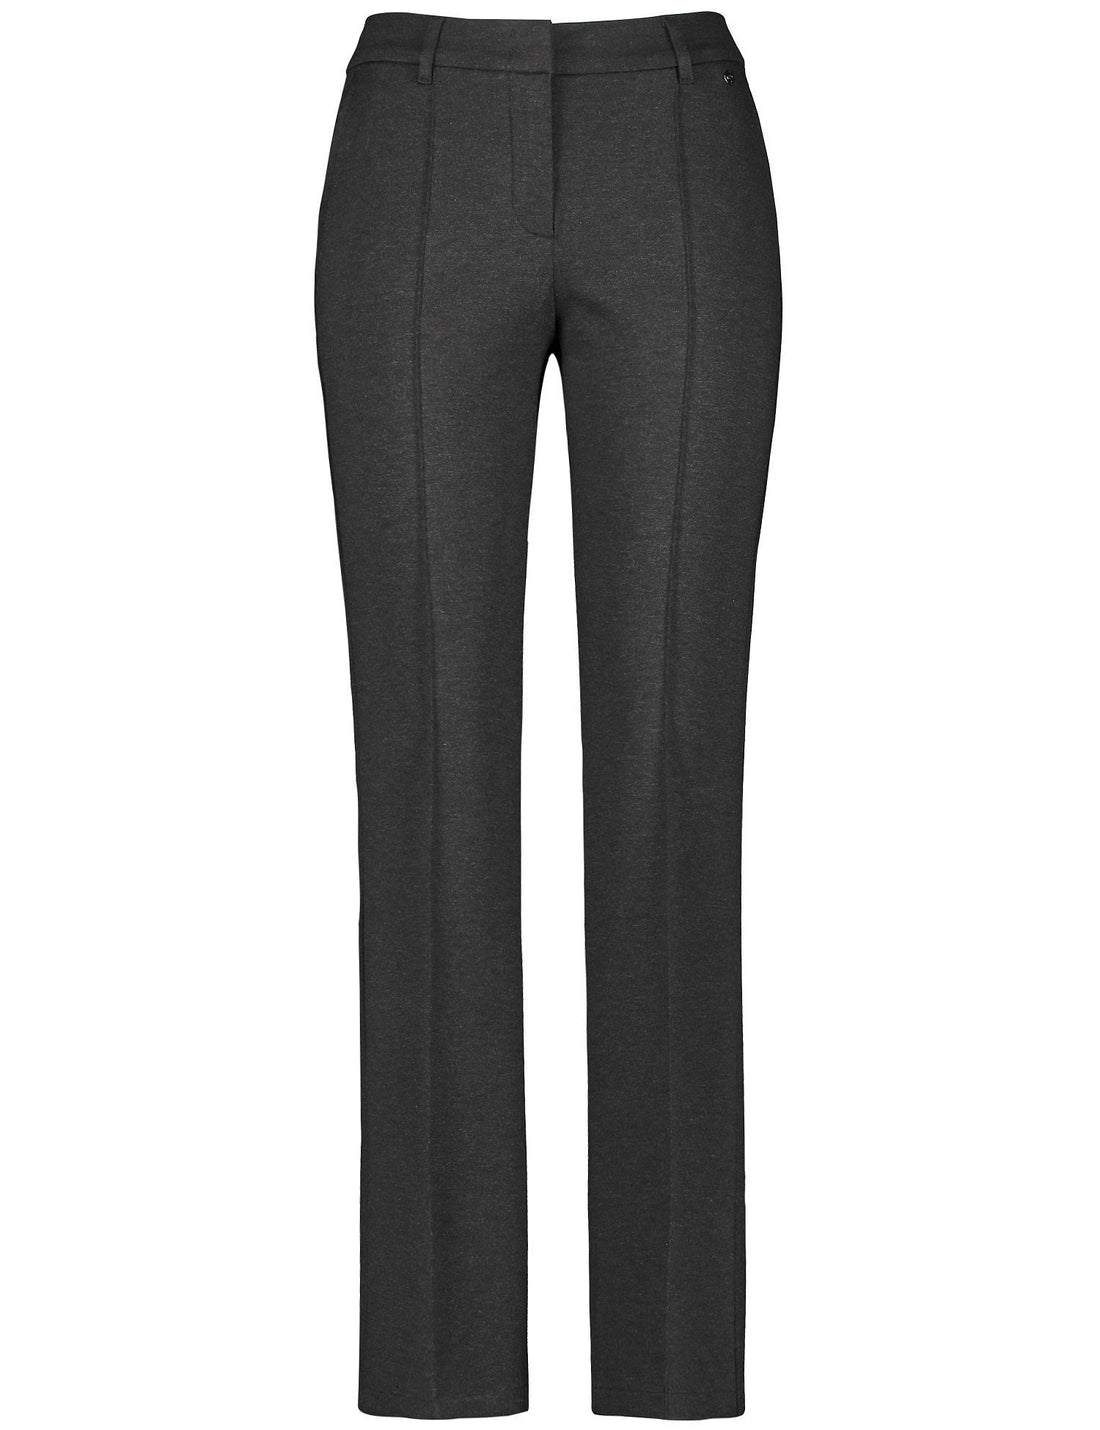 Flared Trousers With Vertical Pintucks And Added Stretch_122018-66311_202690_02